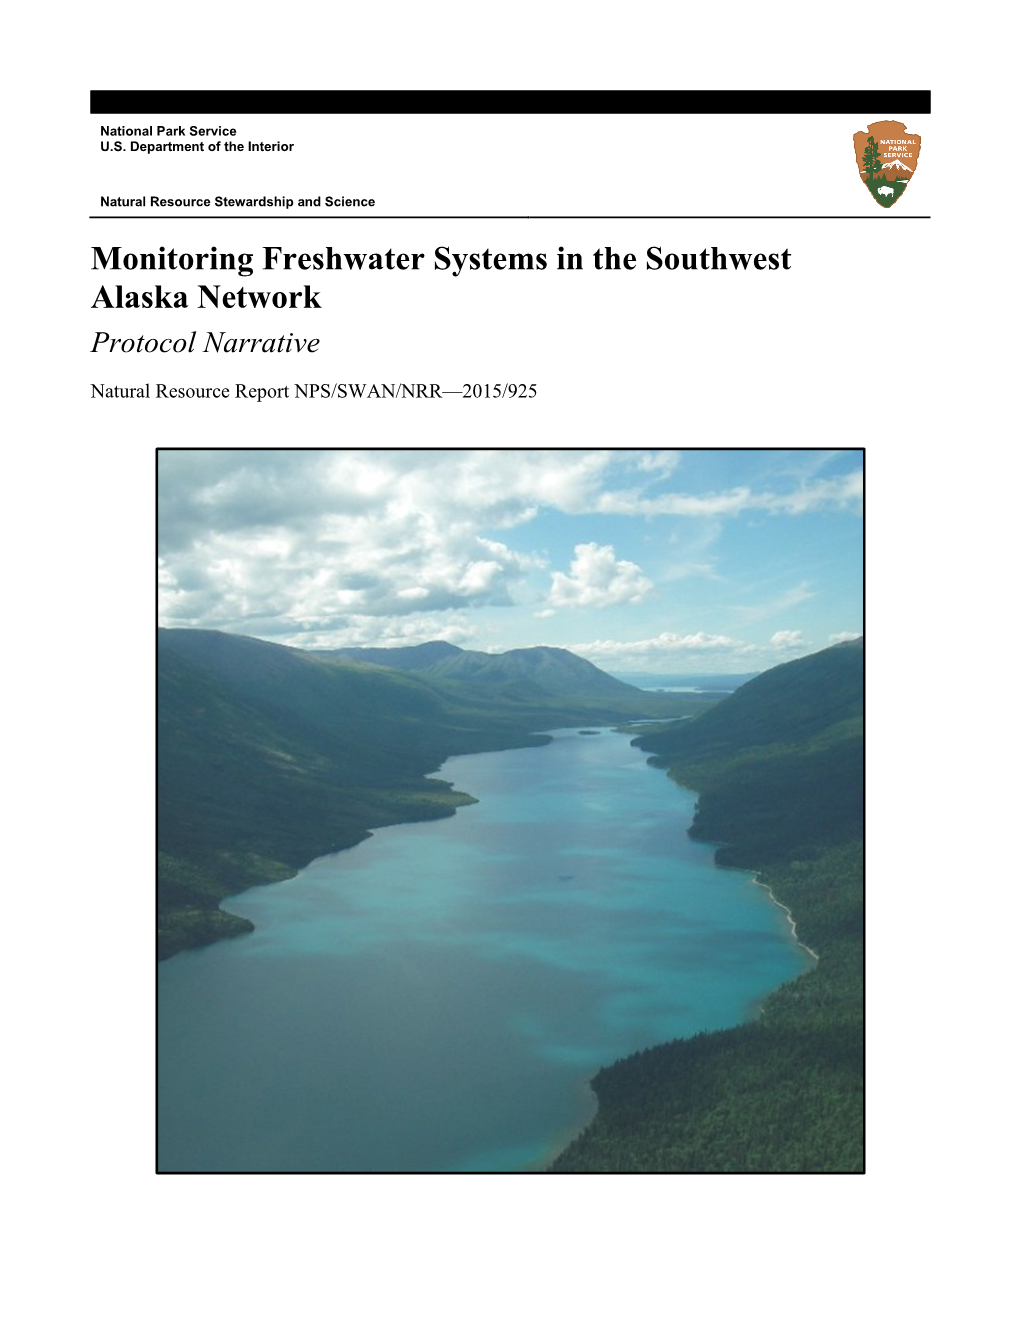 Monitoring Freshwater Systems in the Southwest Alaska Network Protocol Narrative